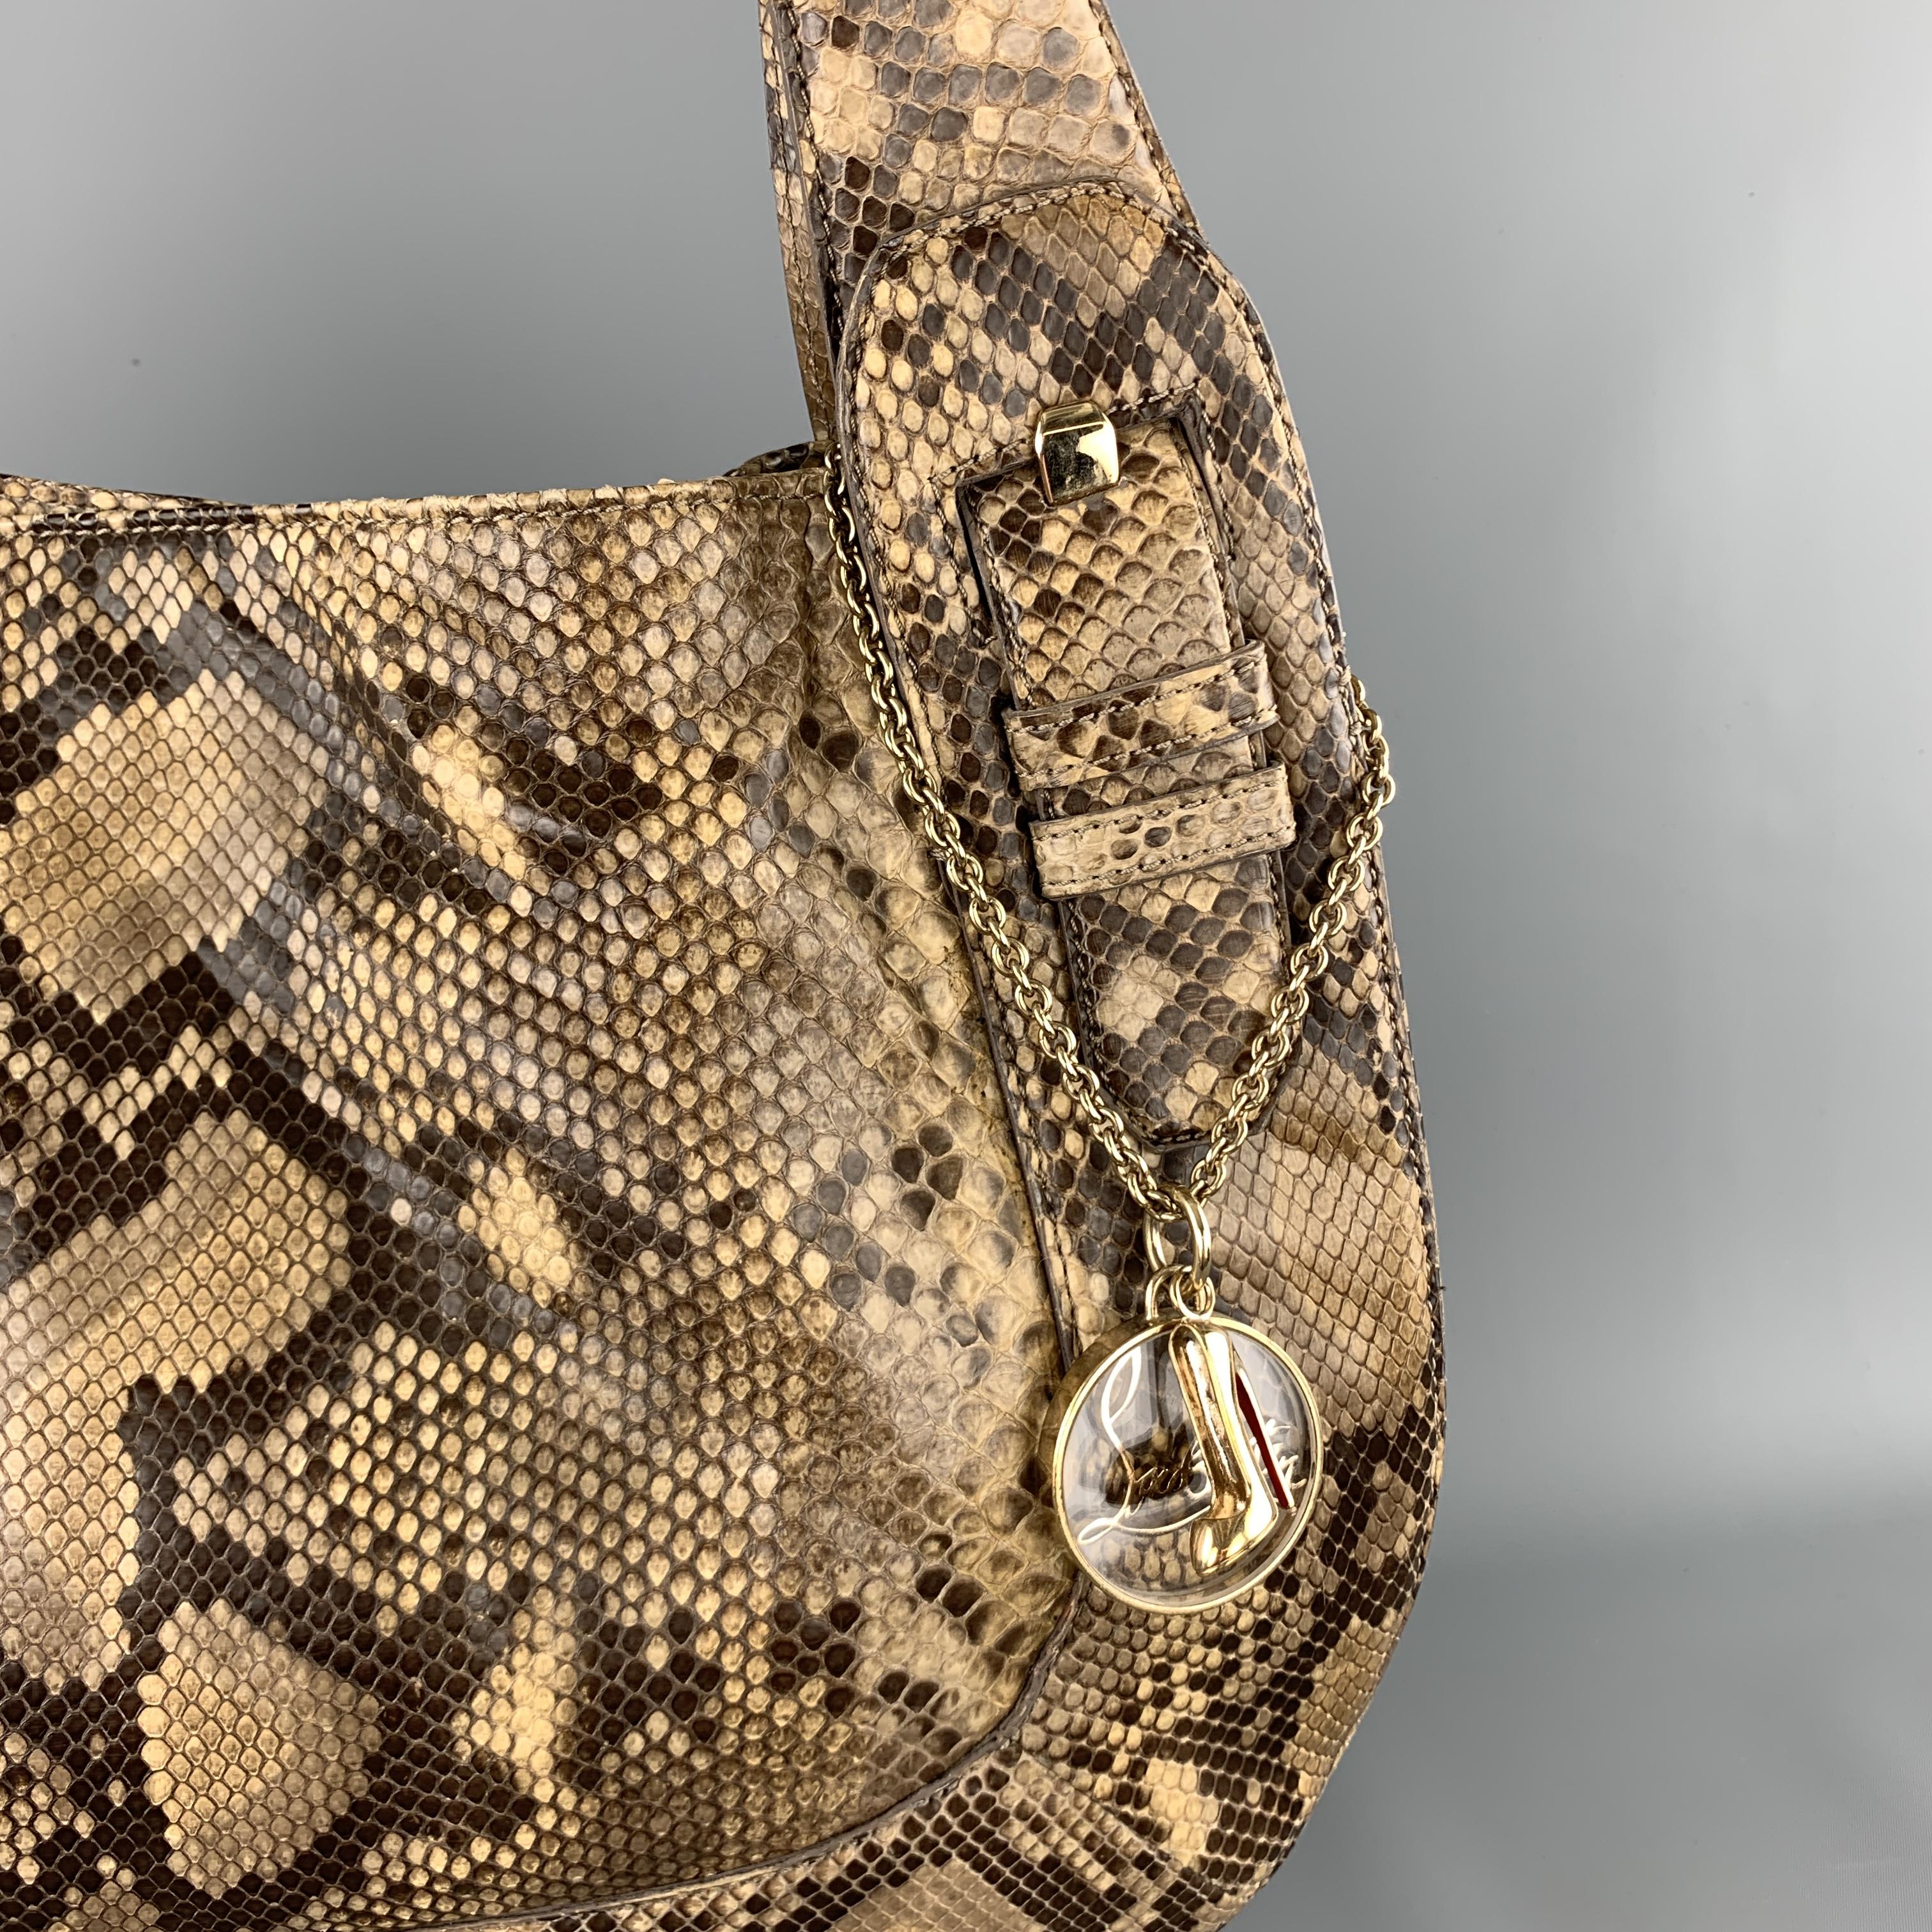 CHRISTIAN LOUBOUTIN shoulder bag comes in beige snake skin leather with double leather buckle accented shoulder straps, gold tone metal chain with charms, and red twill liner. 

Very Good Pre-Owned Condition.

Measurements:

Length: 15.5 in.
Width: